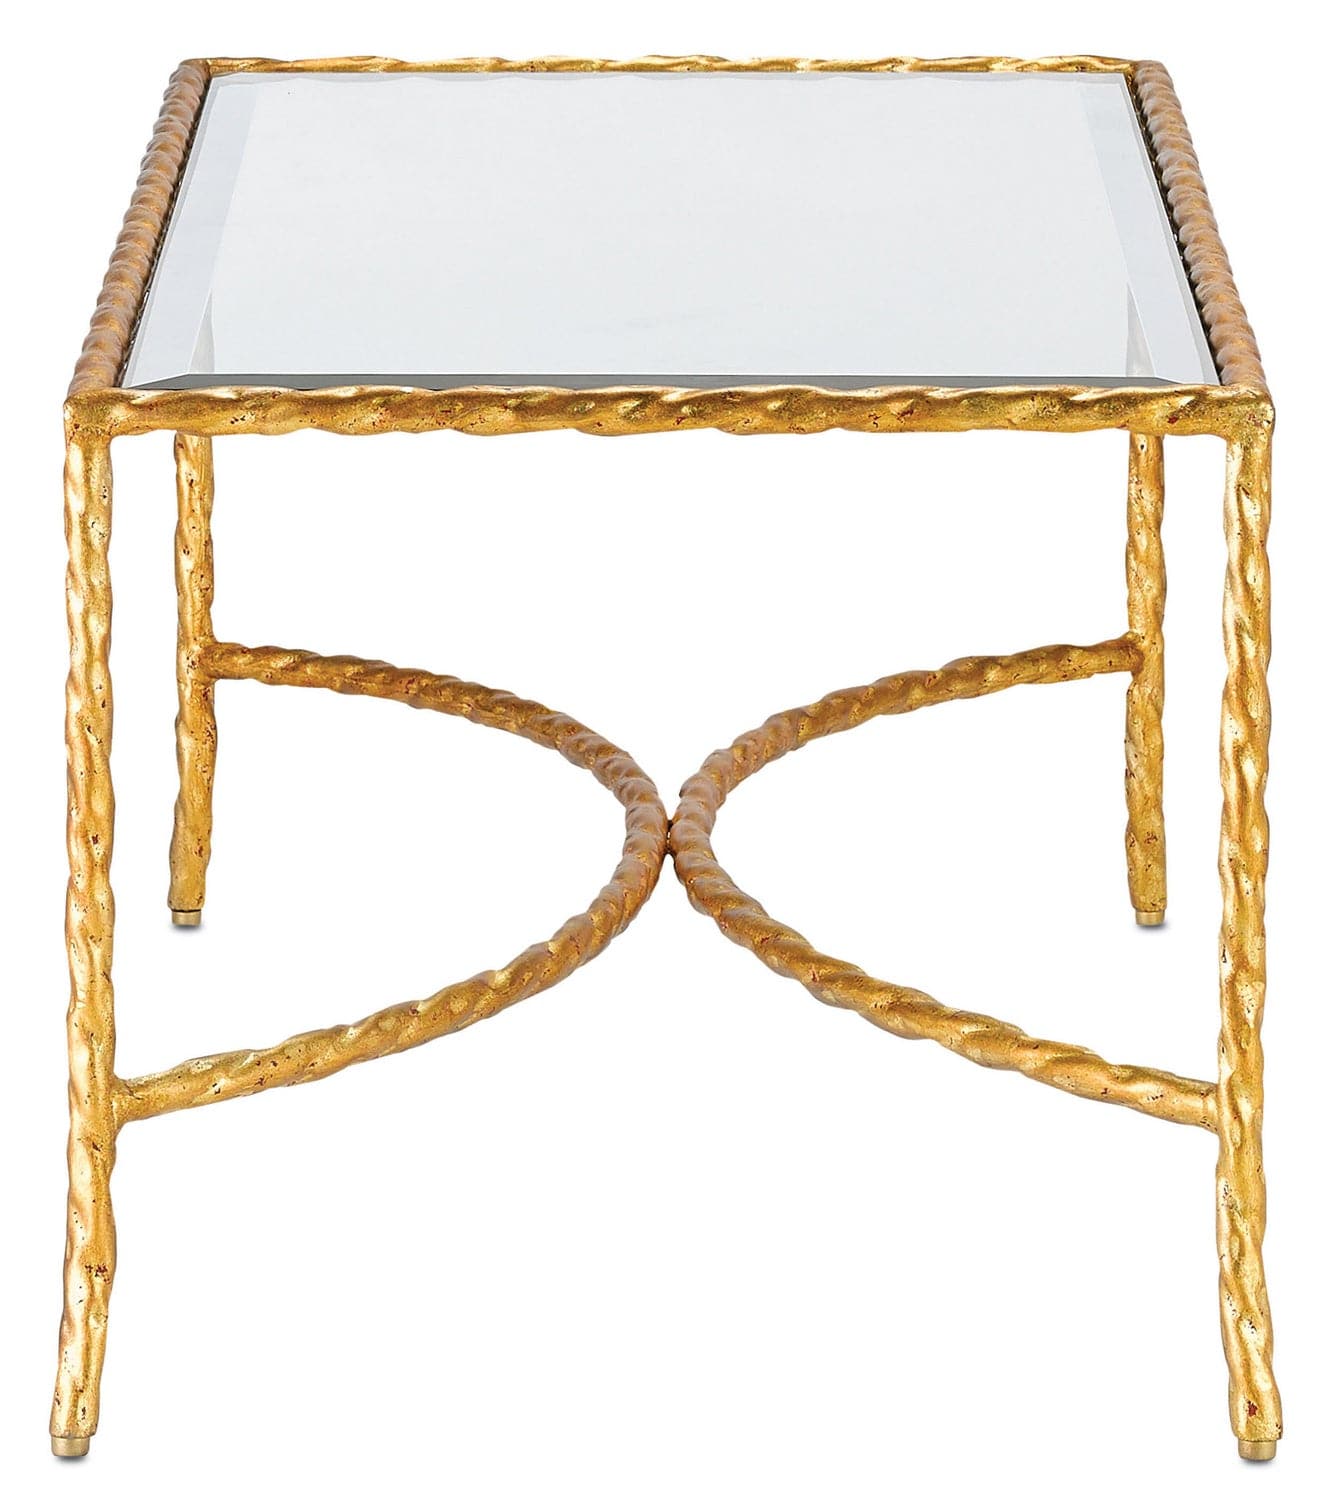 Cocktail Table from the Gilt collection in Gilt Bronze finish